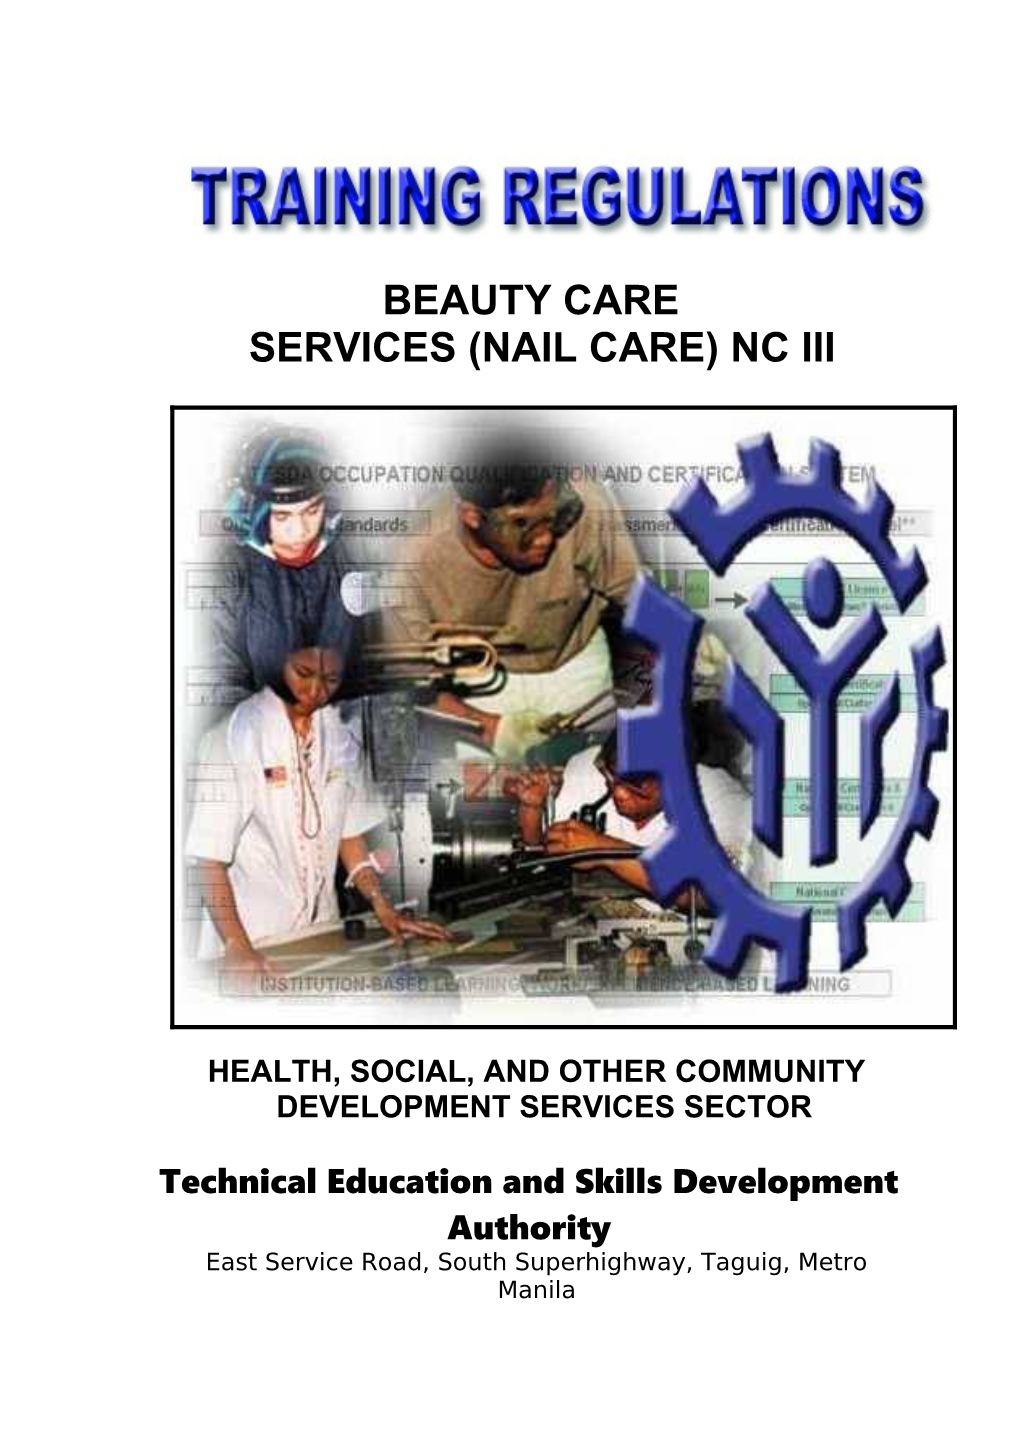 Services (Nail Care)Nc Iii